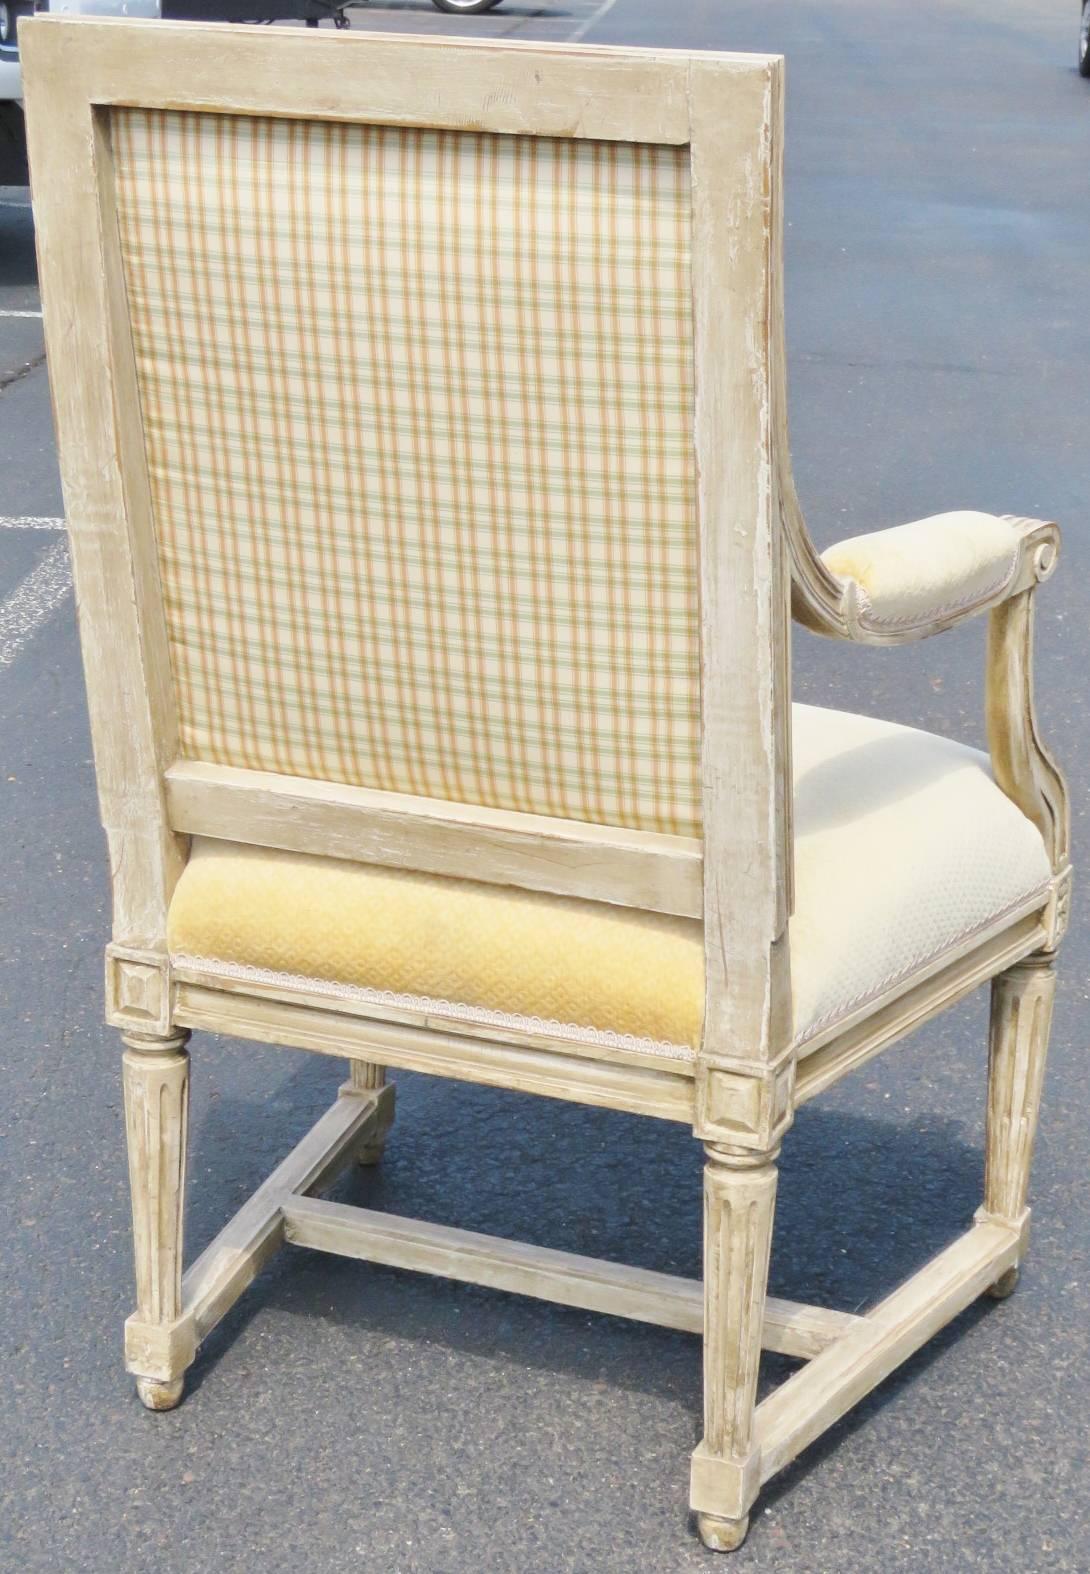 Distressed painted carved frame. Yellow upholstered back and seat. Seat back upholstered with complimenting stripes.